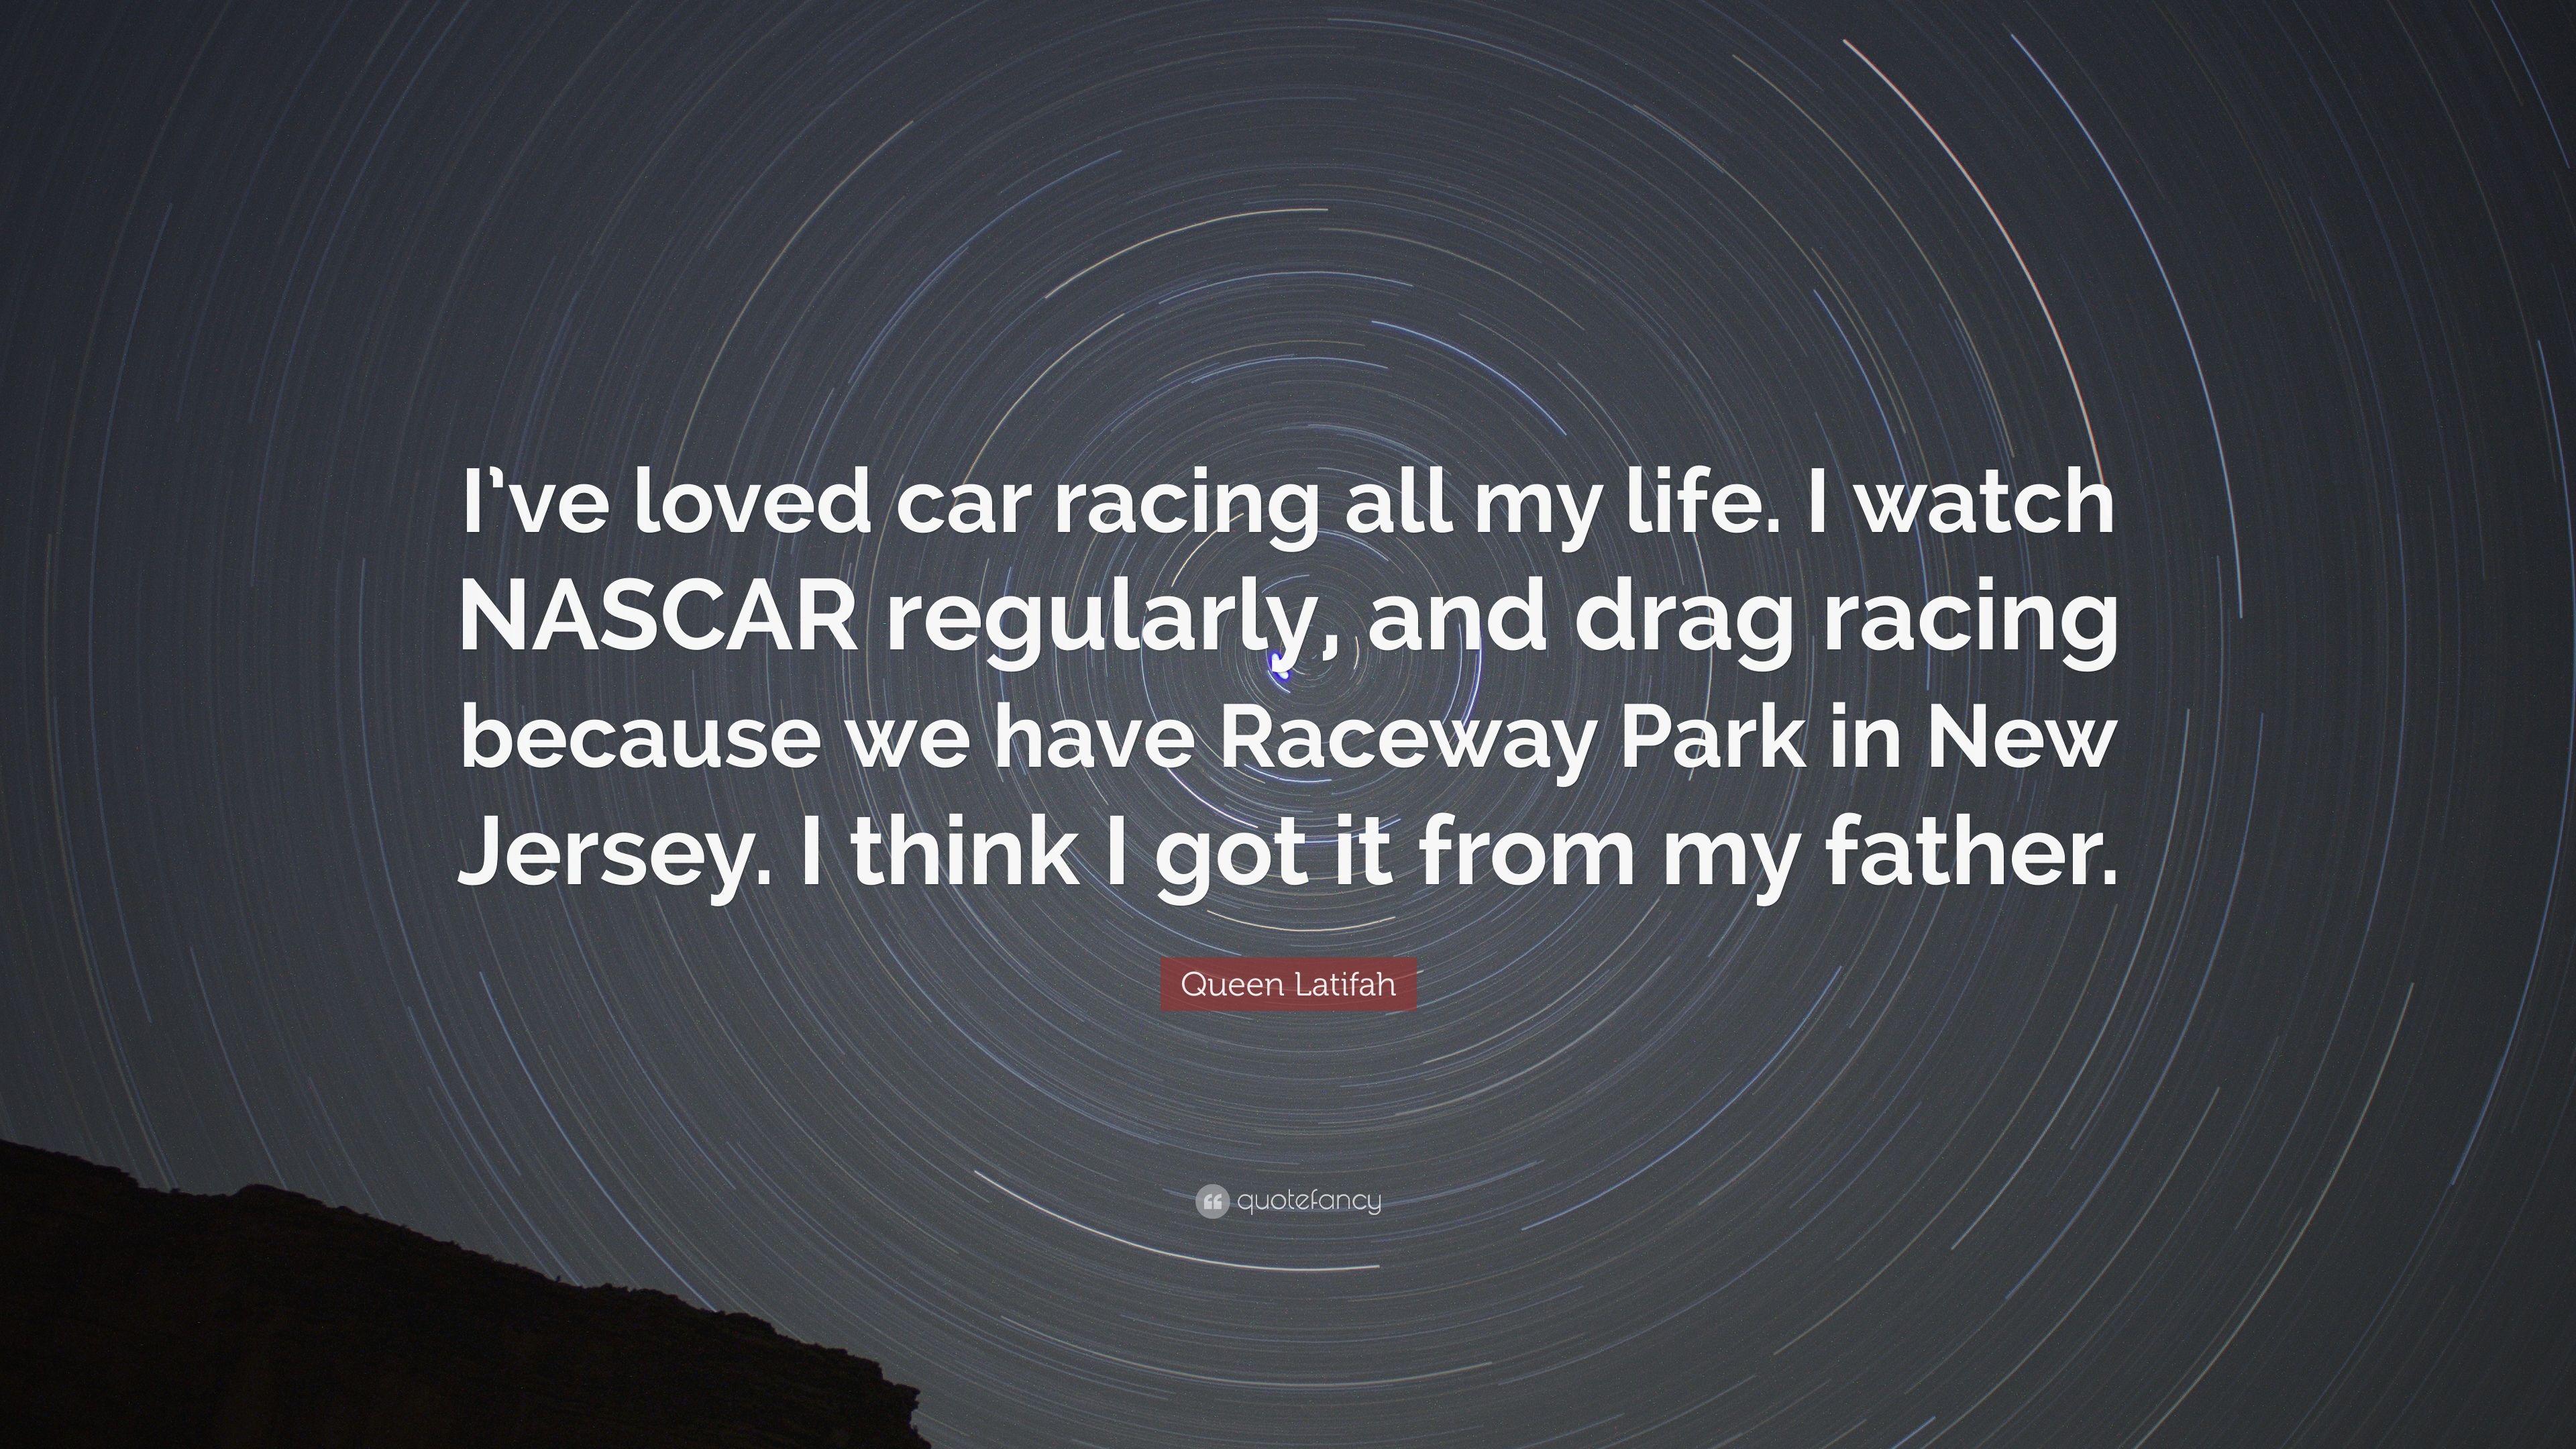 Queen Latifah Quote: “I've loved car racing all my life. I watch